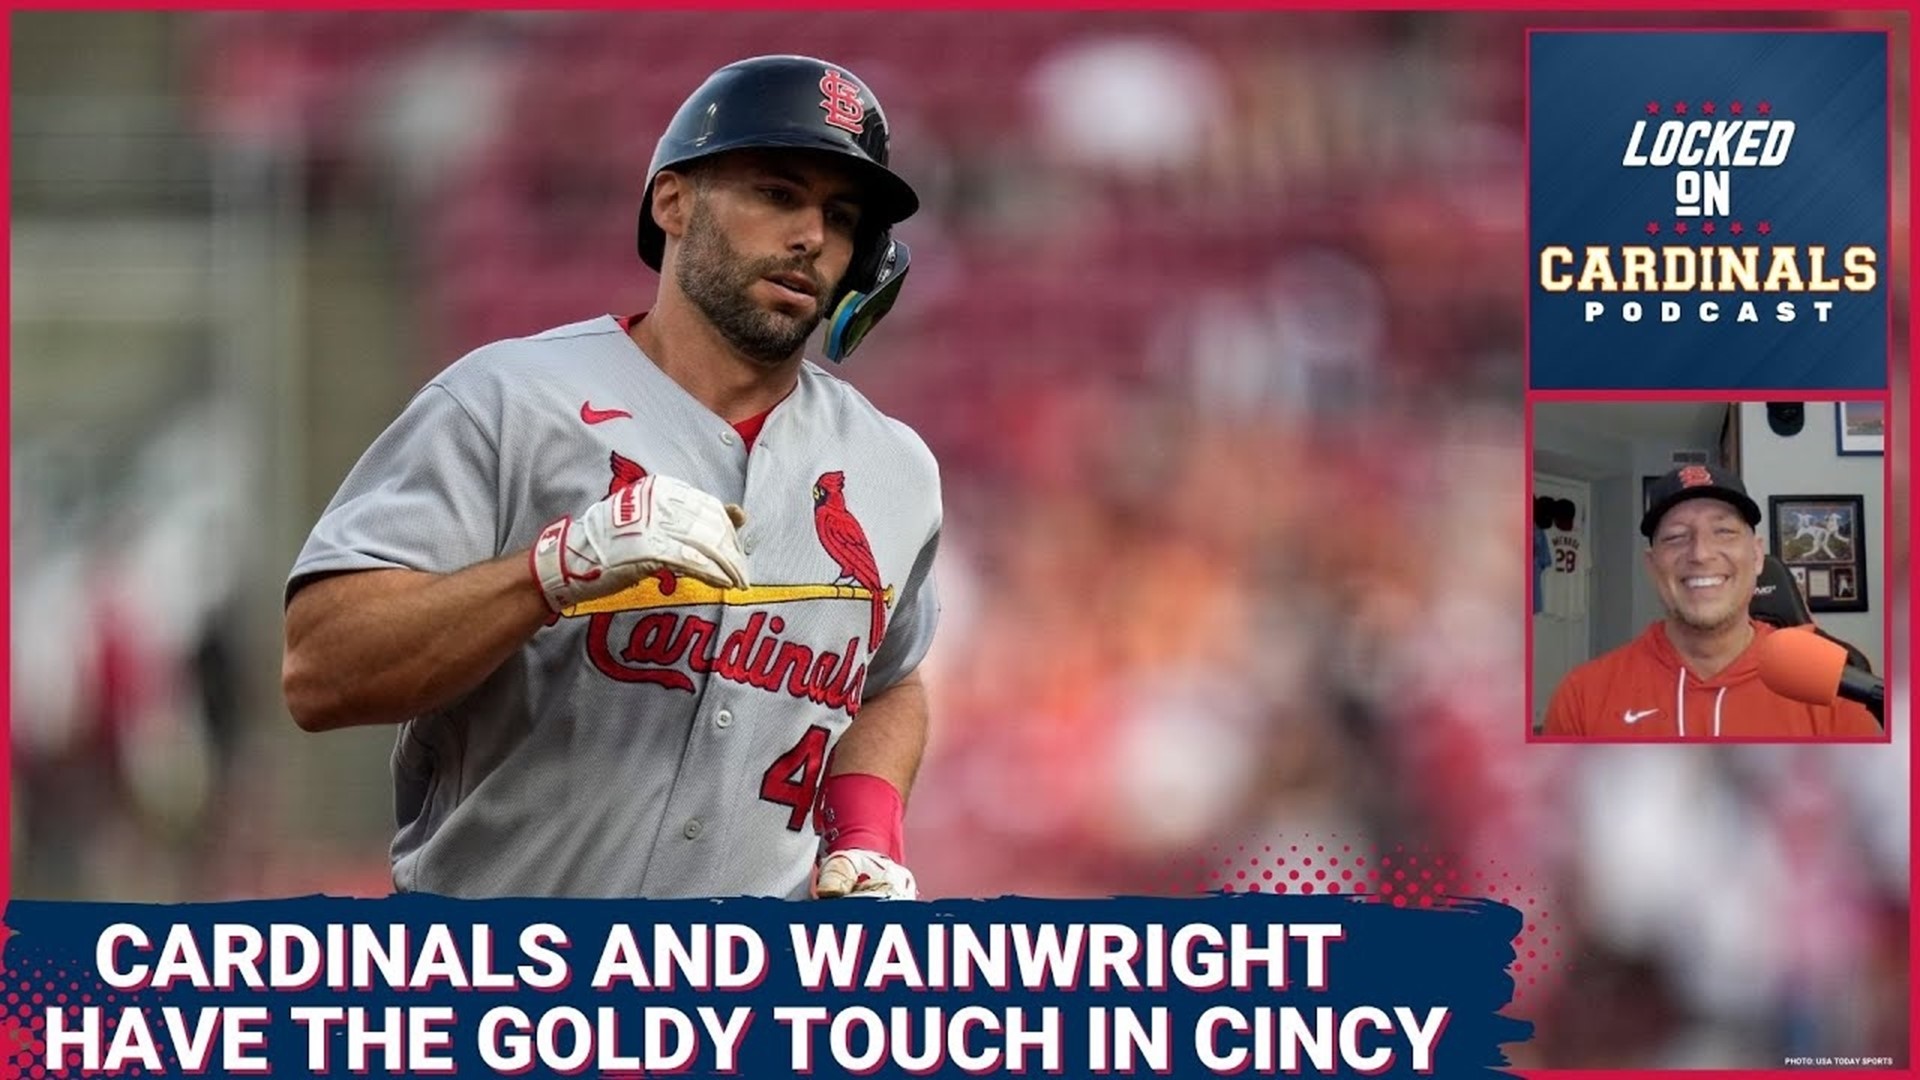 Goldy Goes Yard Twice As The St. Louis Cardinals And Adam Wainwright Get A Win In The Devil's Lair